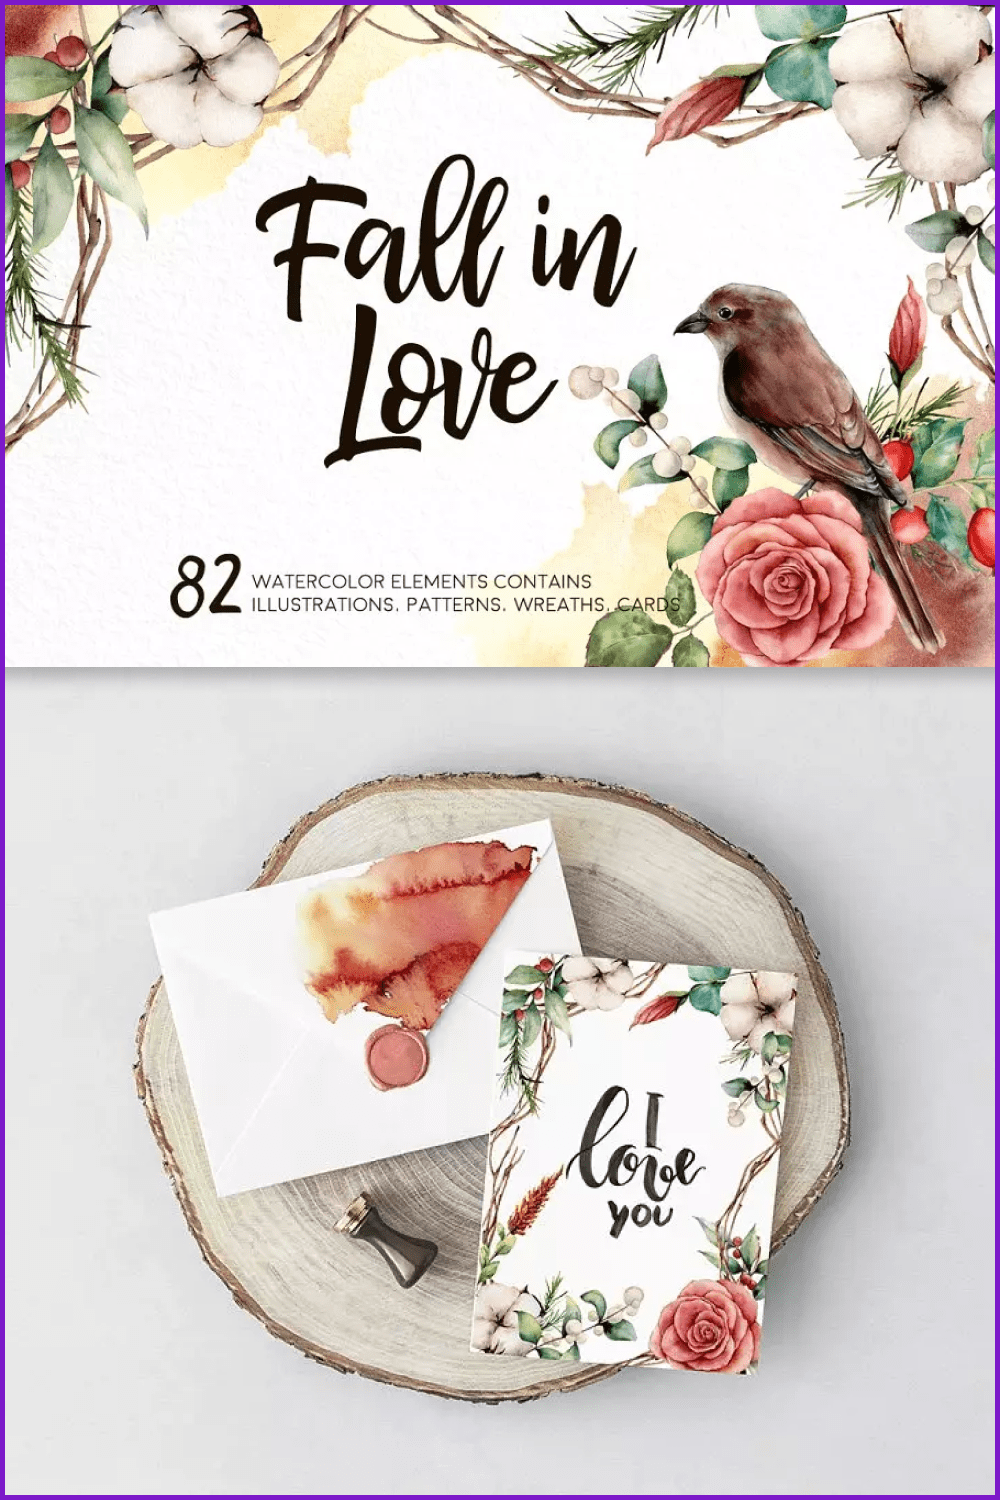 A collage of images of watercolor flowers, twigs, birds on an envelope and a postcard.